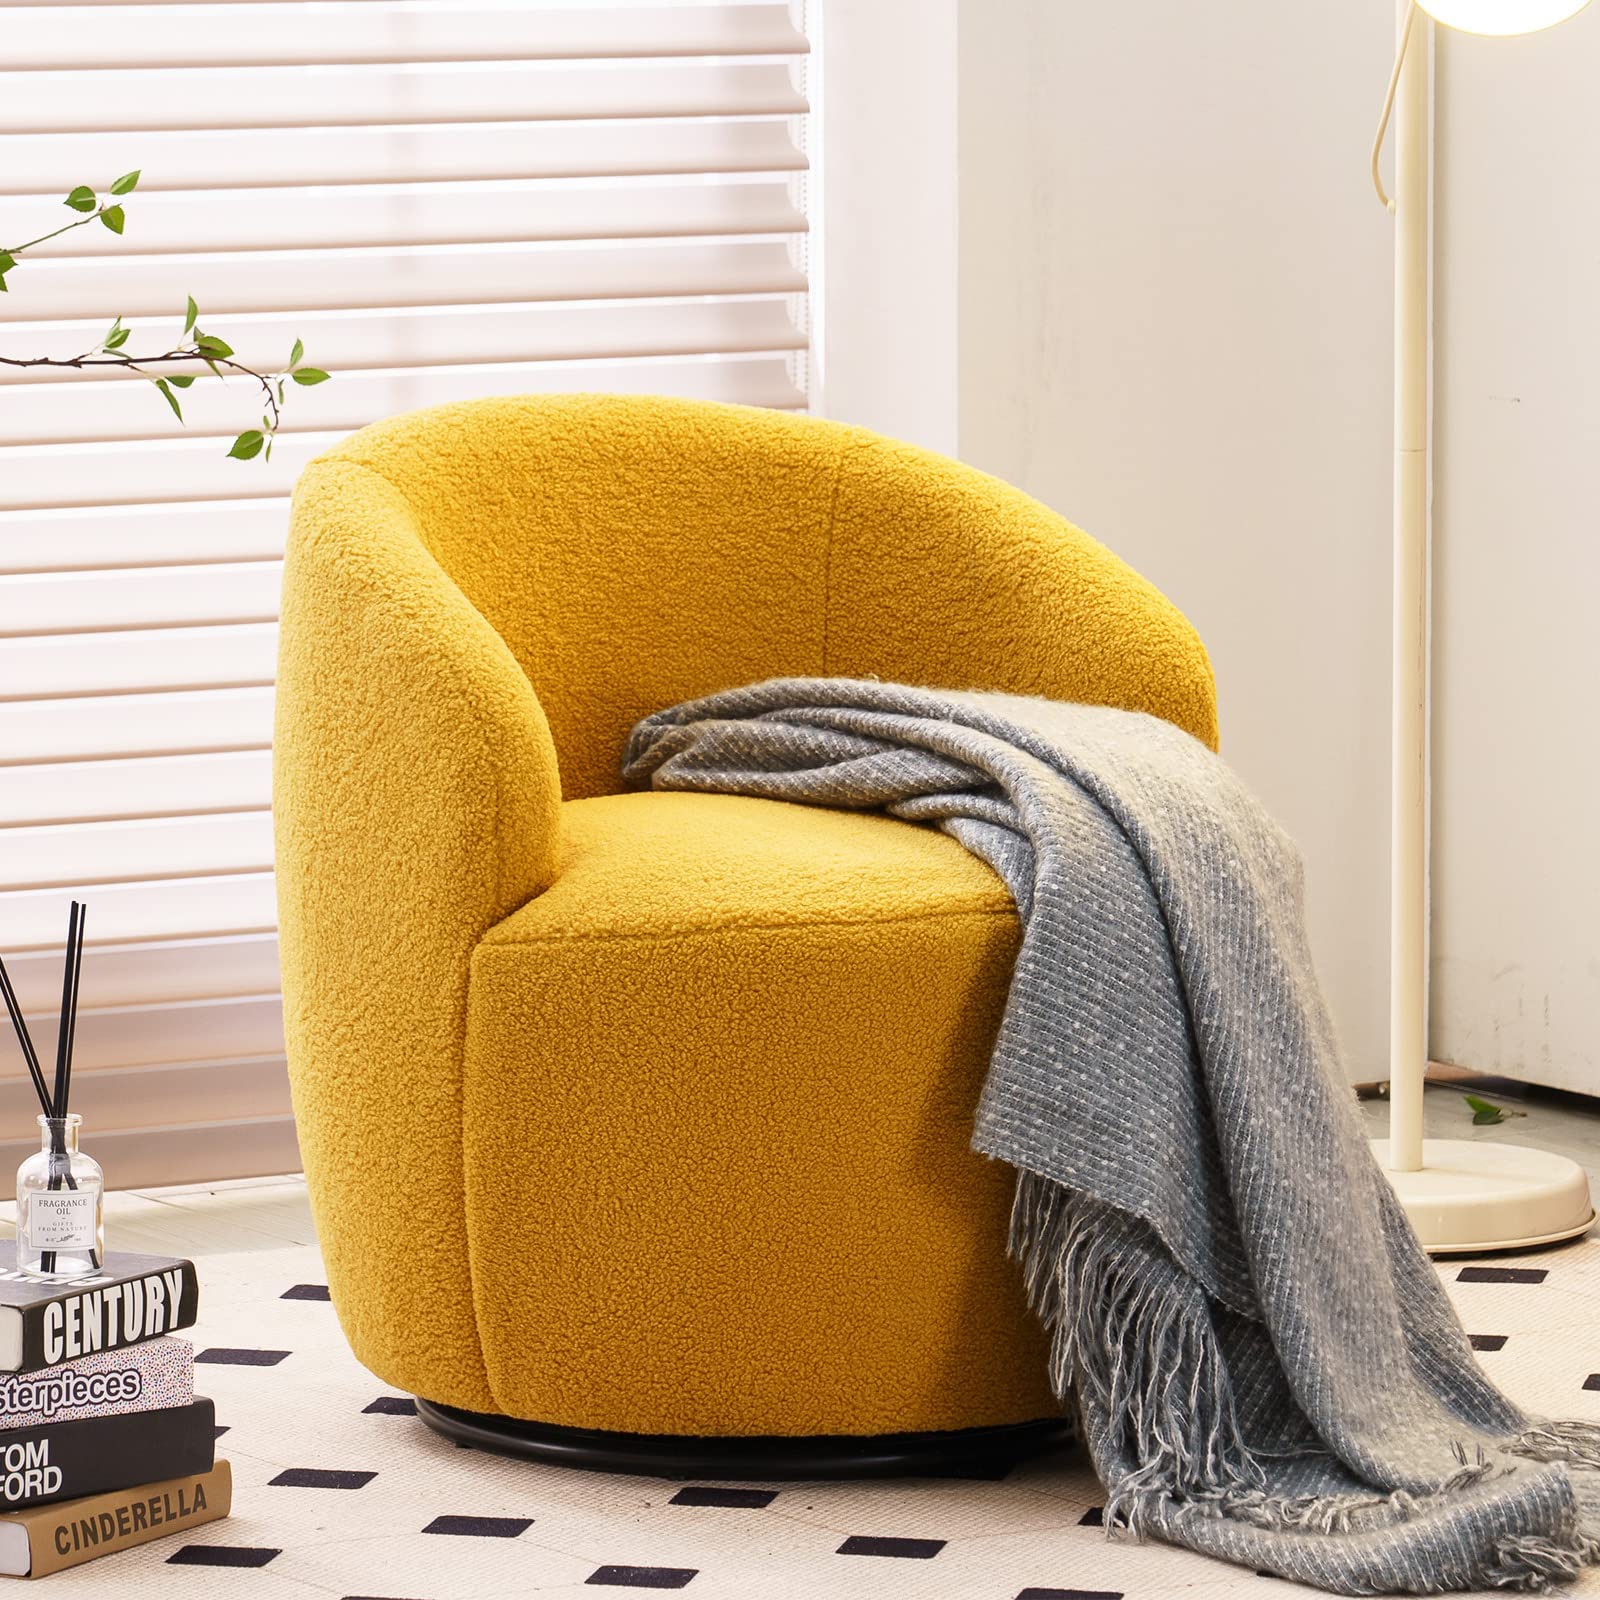 PDCHC Swivel Barrel Accent chair,Round Accent Sofa chair,360 Degree Swivel Barrel chair,Fuzzy club chair Lamb Wool Leisure Arm chair R